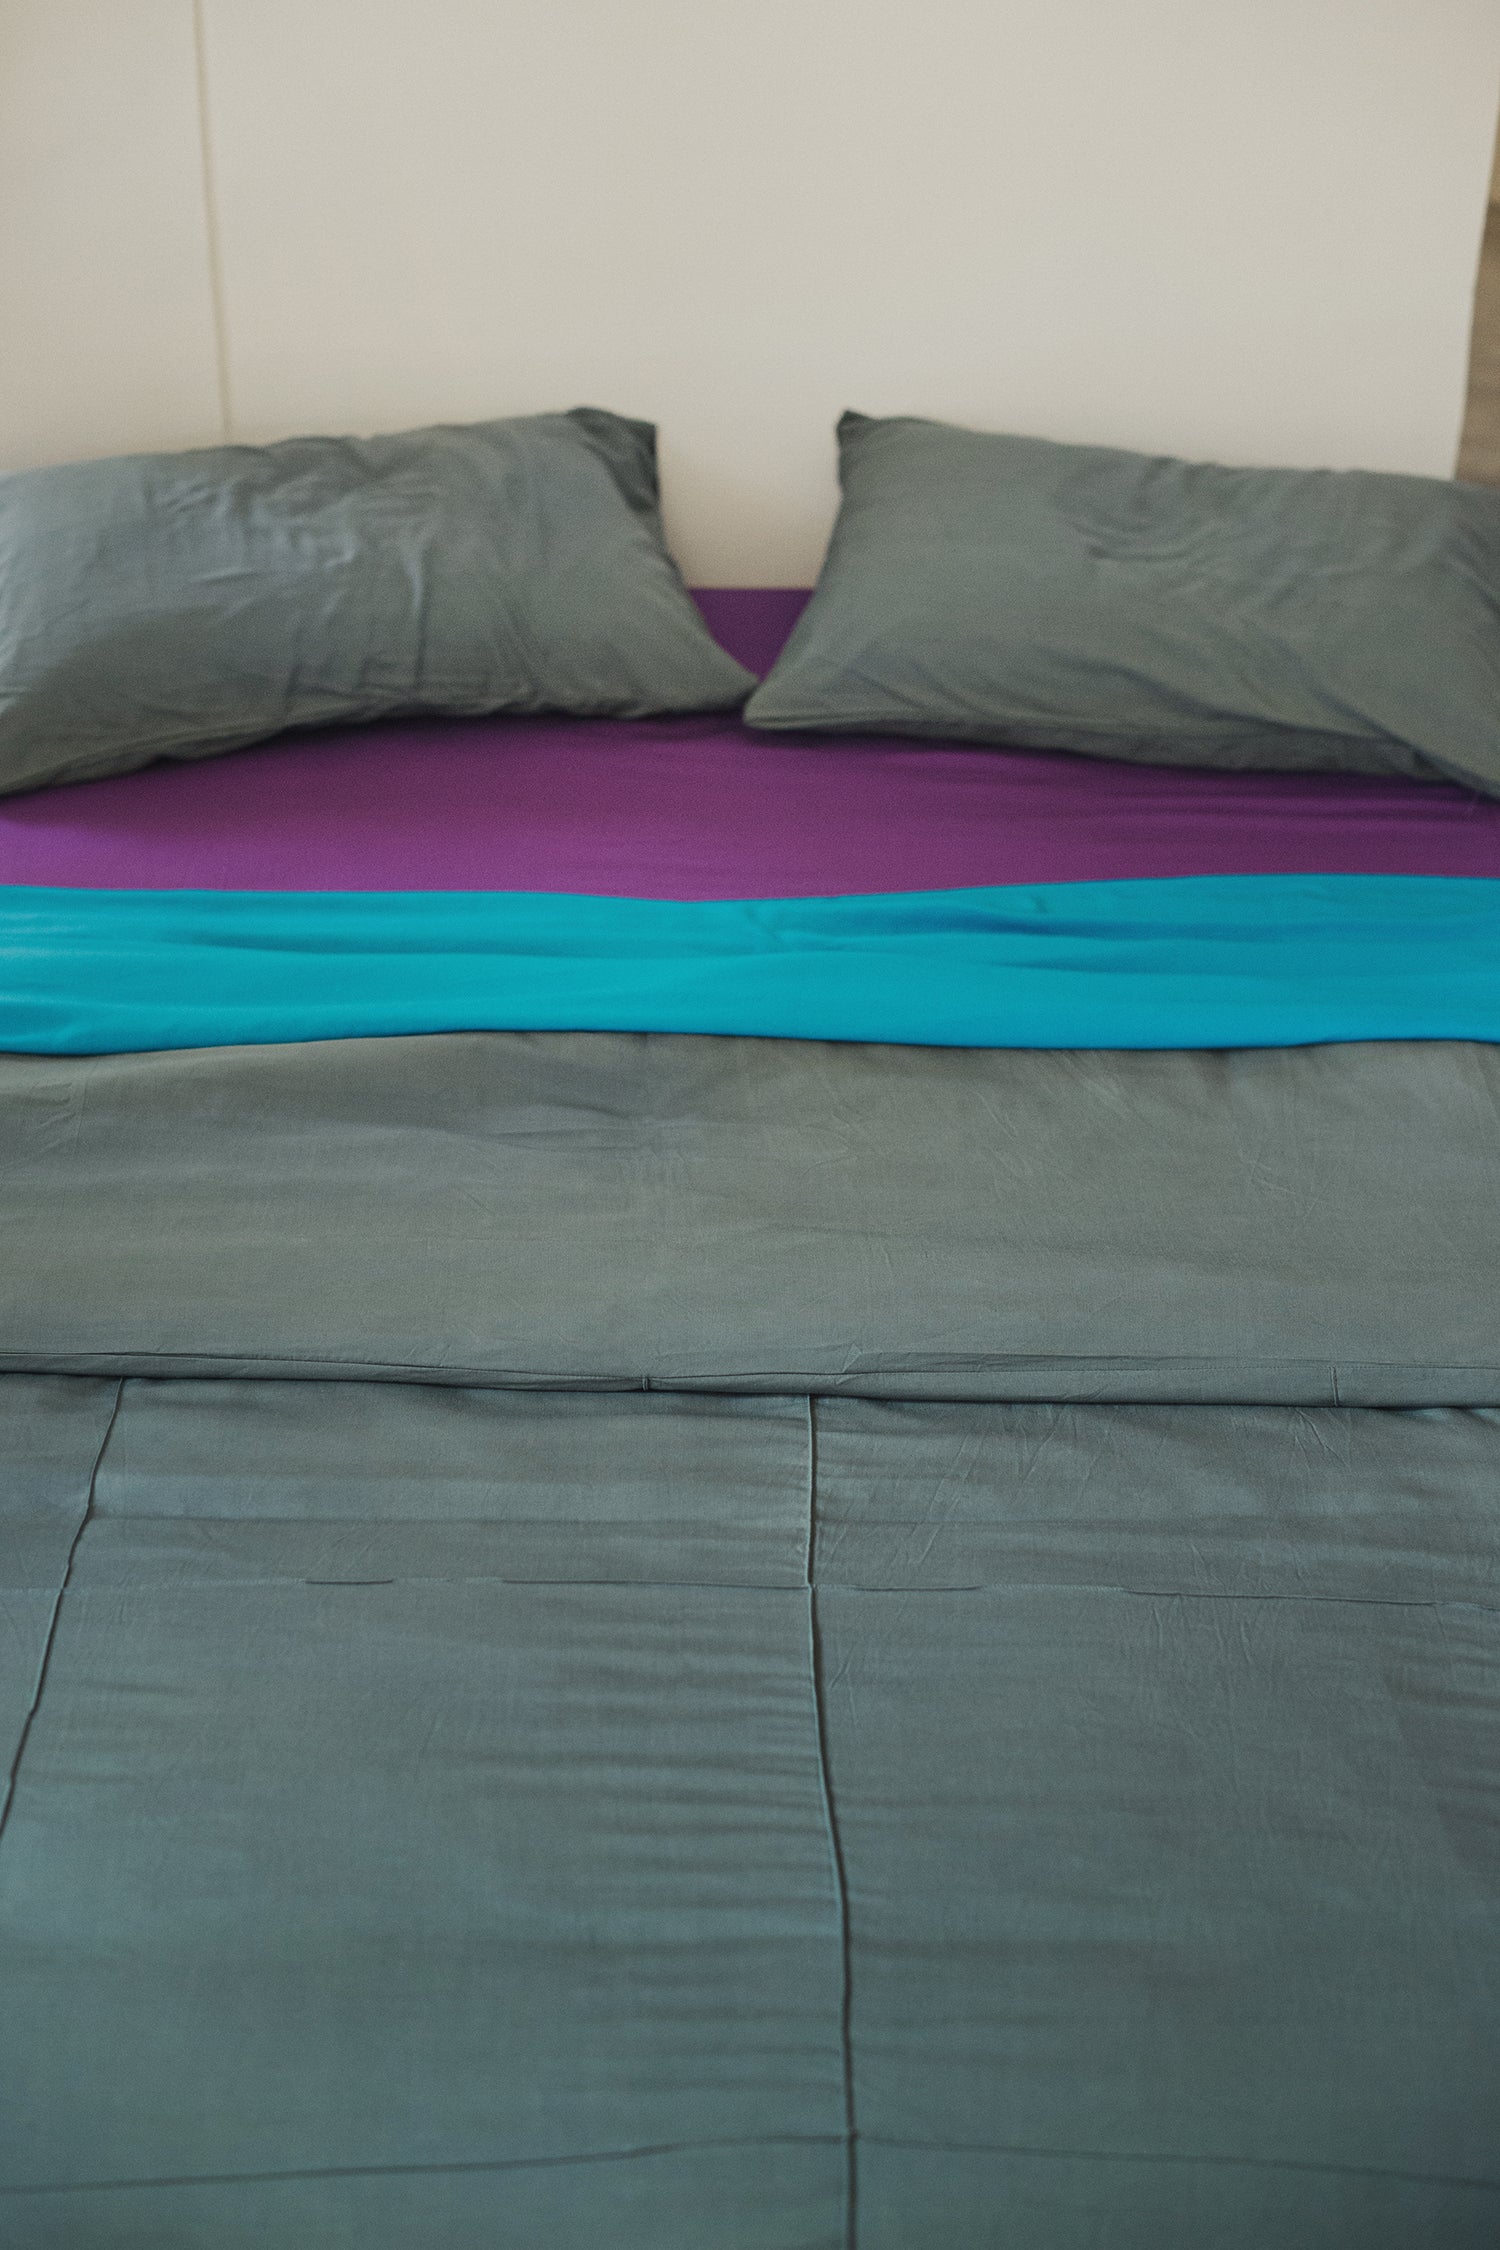 Violet Fitted Sheet